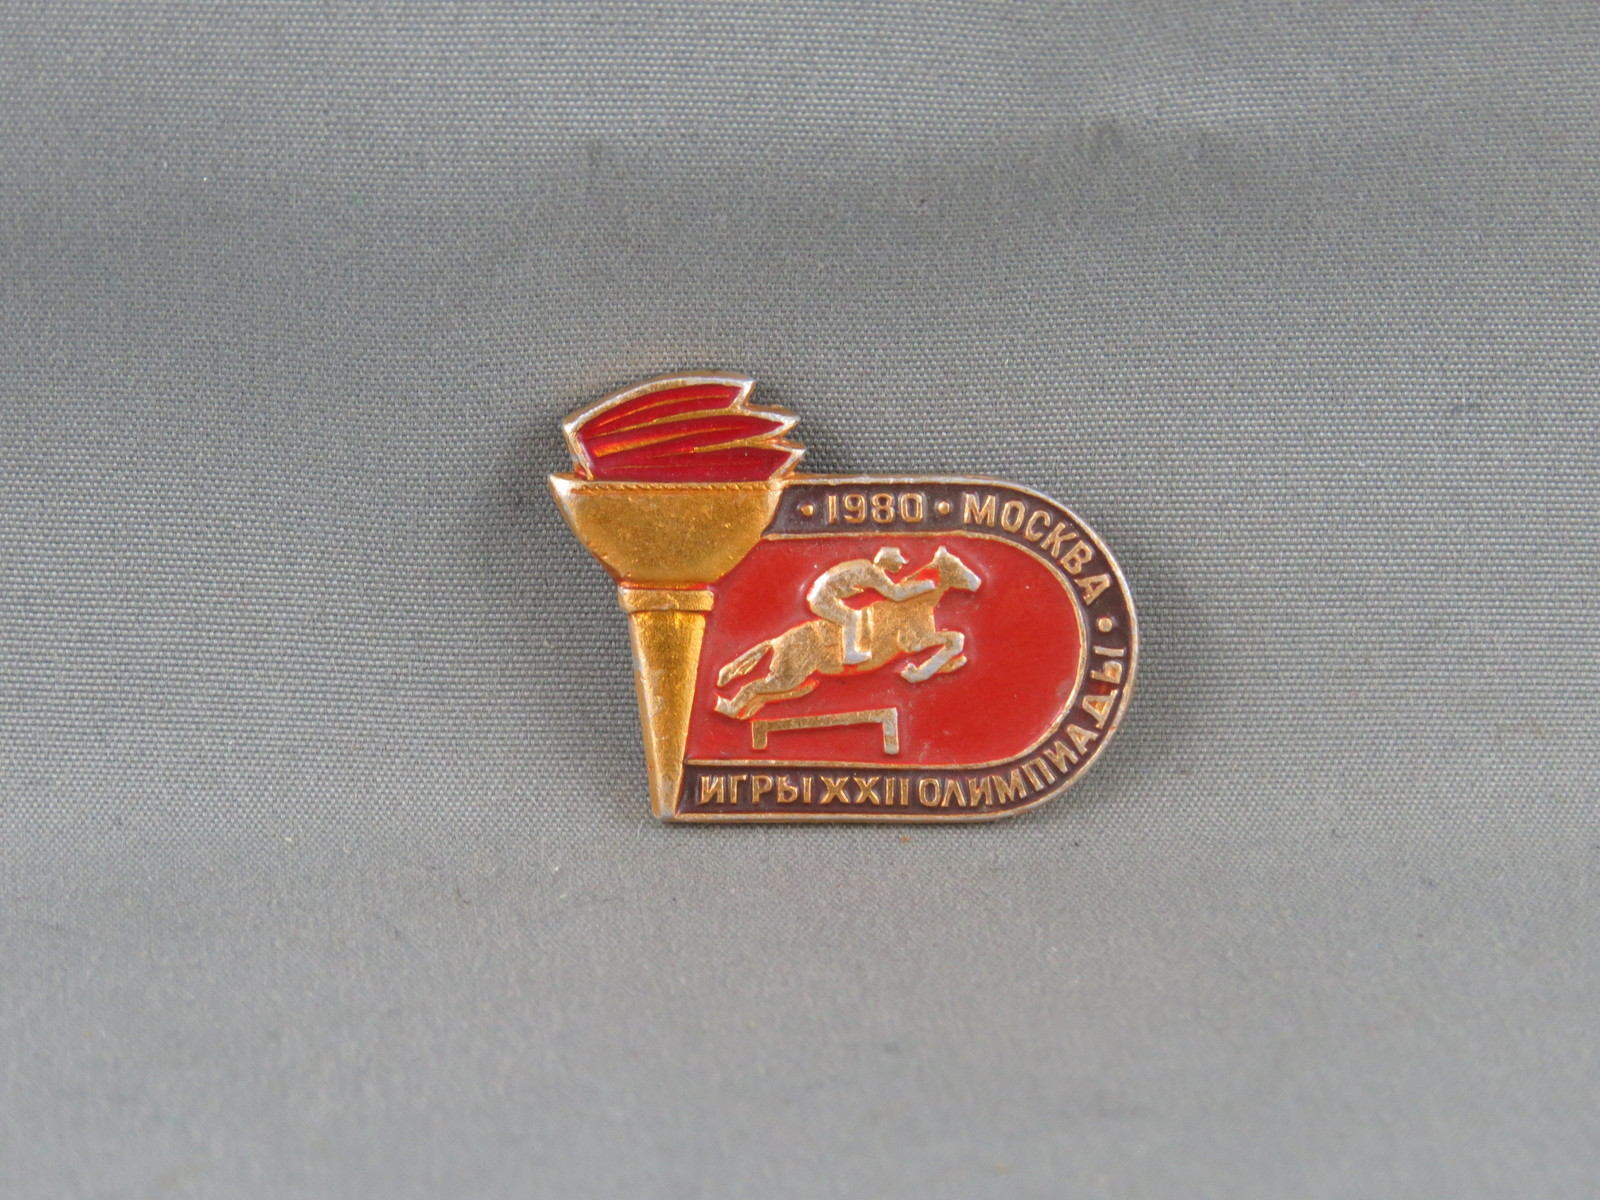 Primary image for Vintage Olympic Event Pin - Equestrian Horse Jumping Moscow 1980 - Stamped Pin